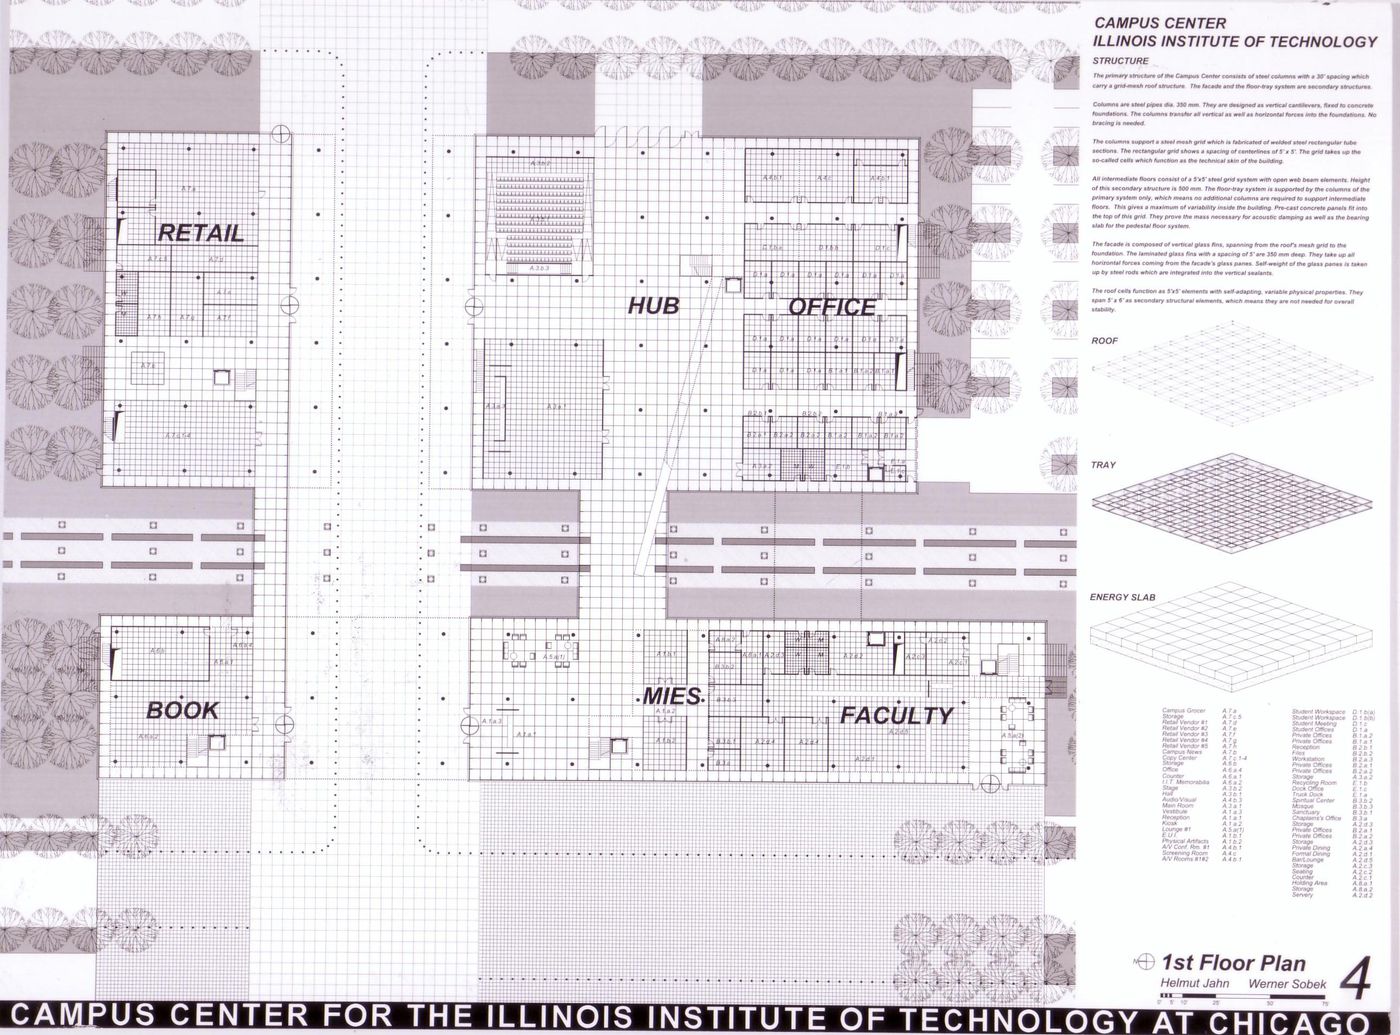 Presentation panels of 1st and 2nd floor plans with text